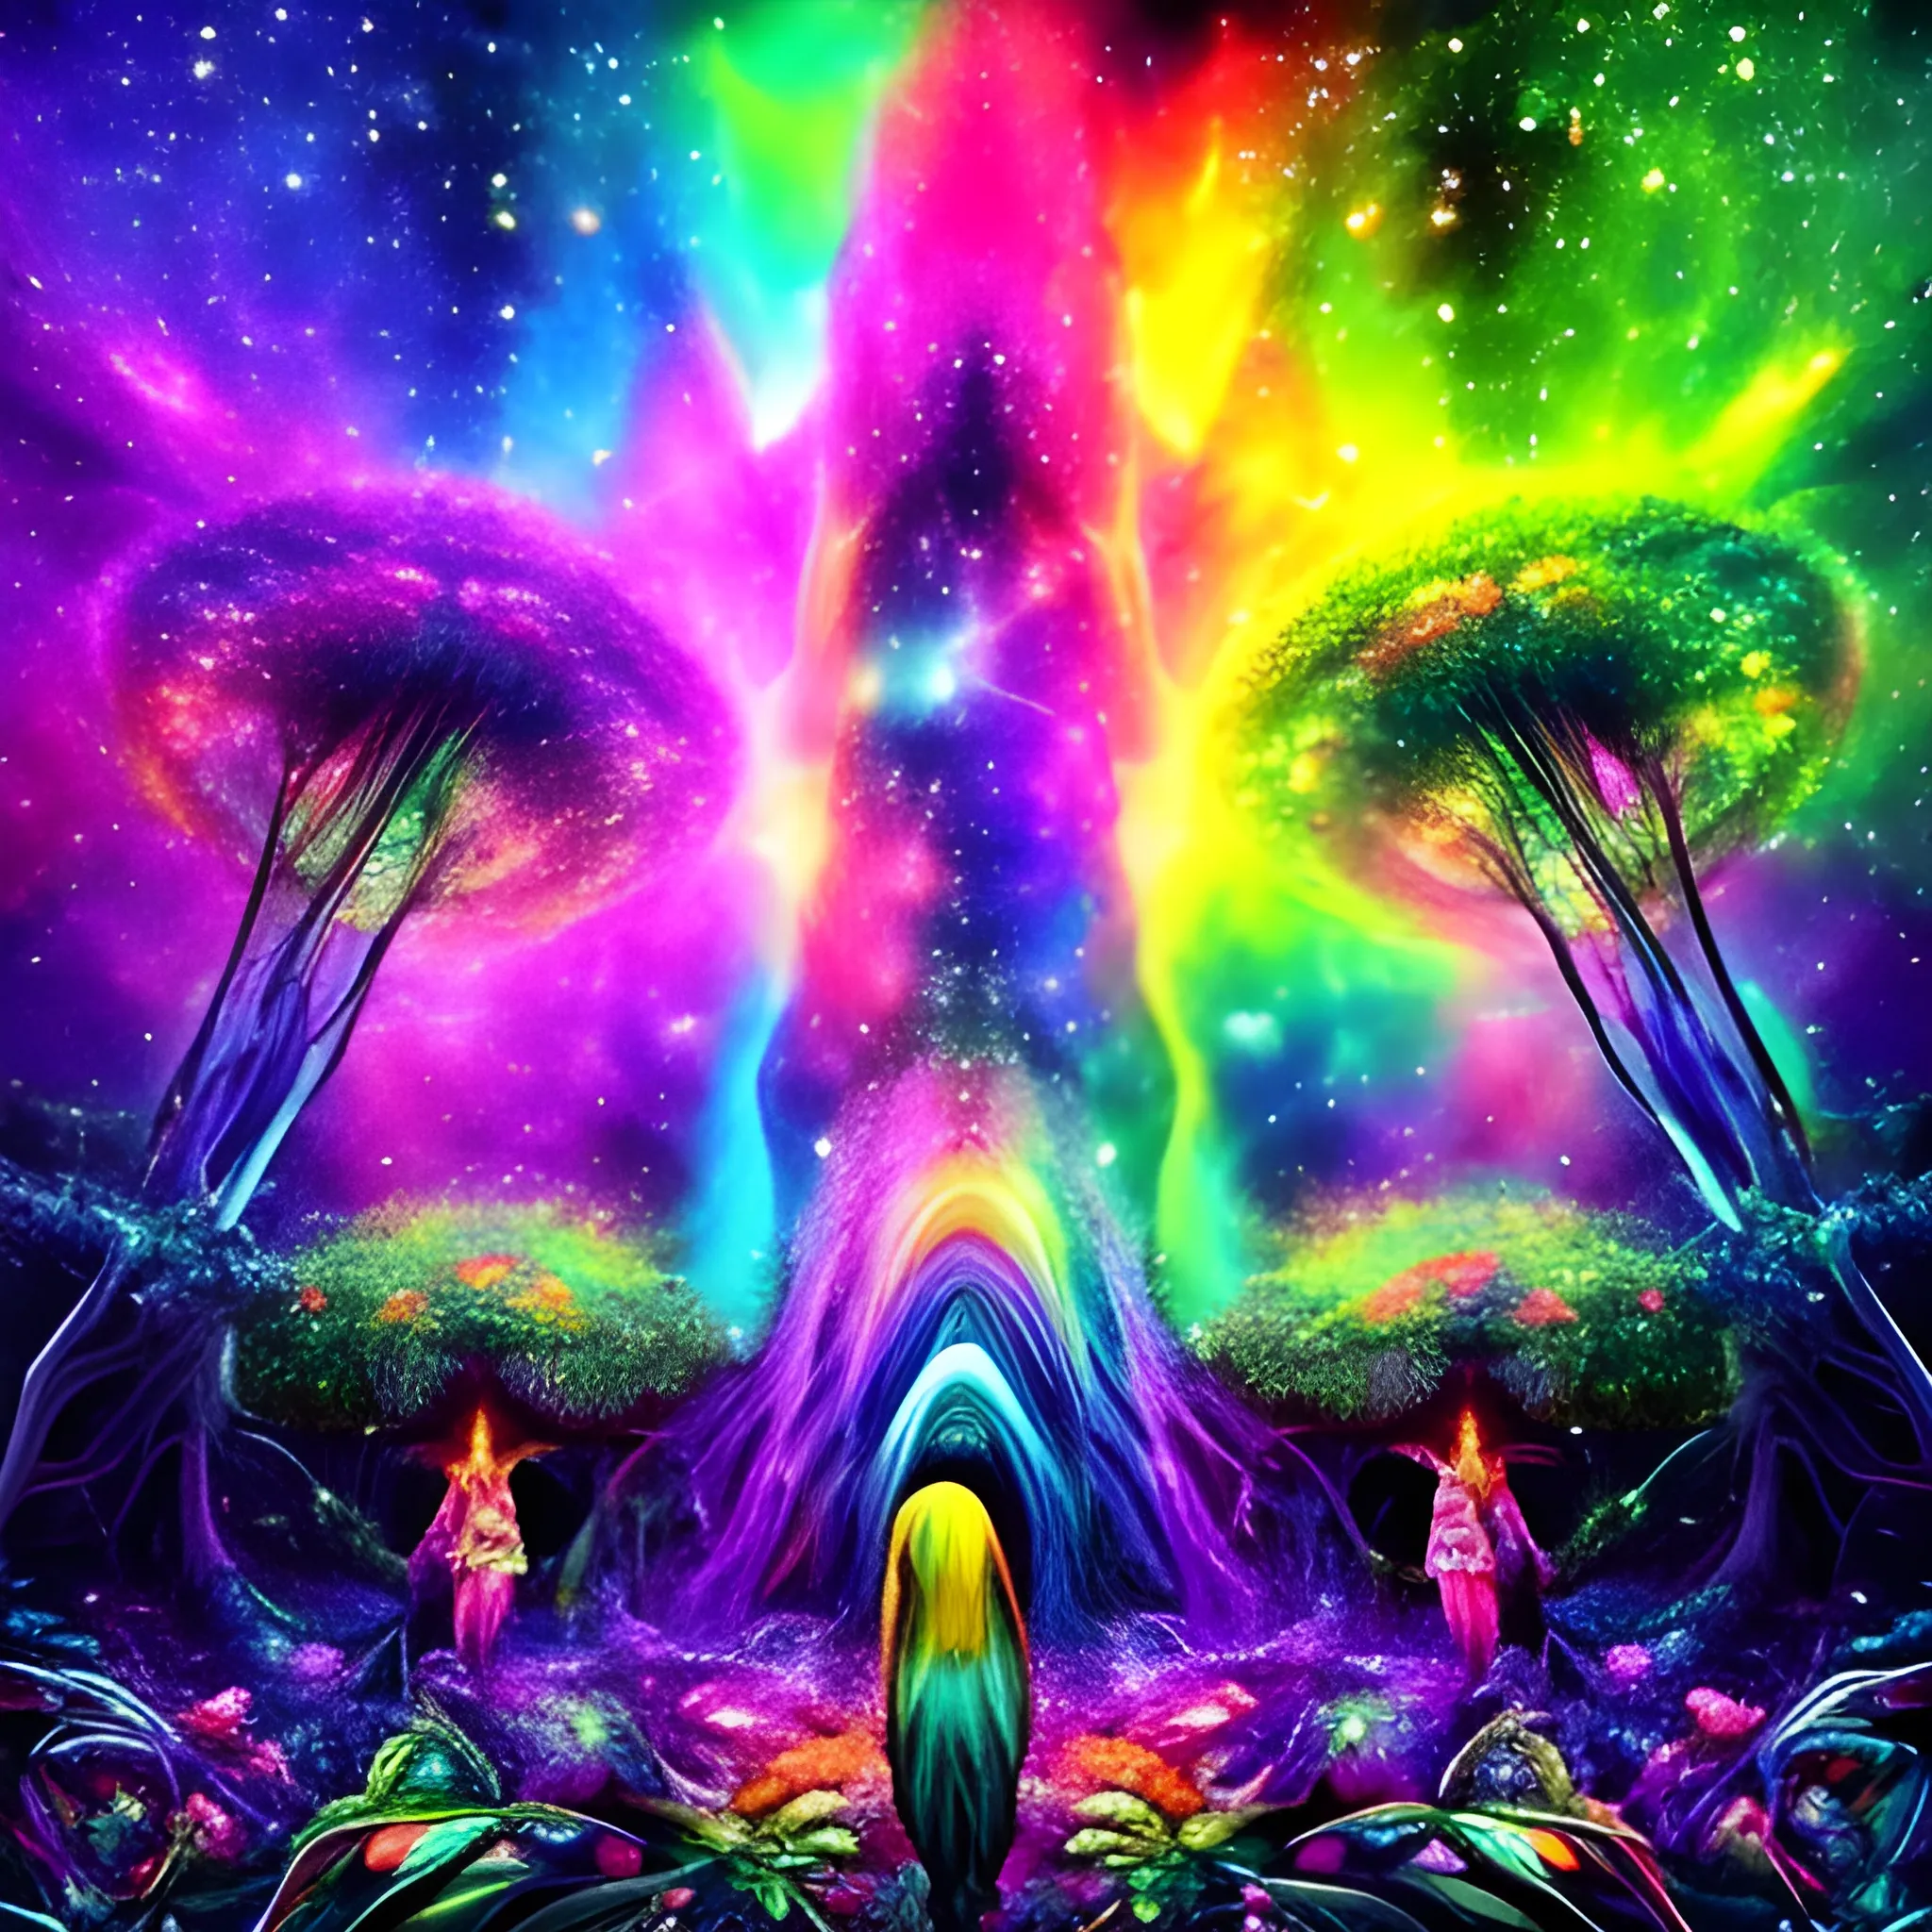 Trippy, eden, people
, colorful, universe
